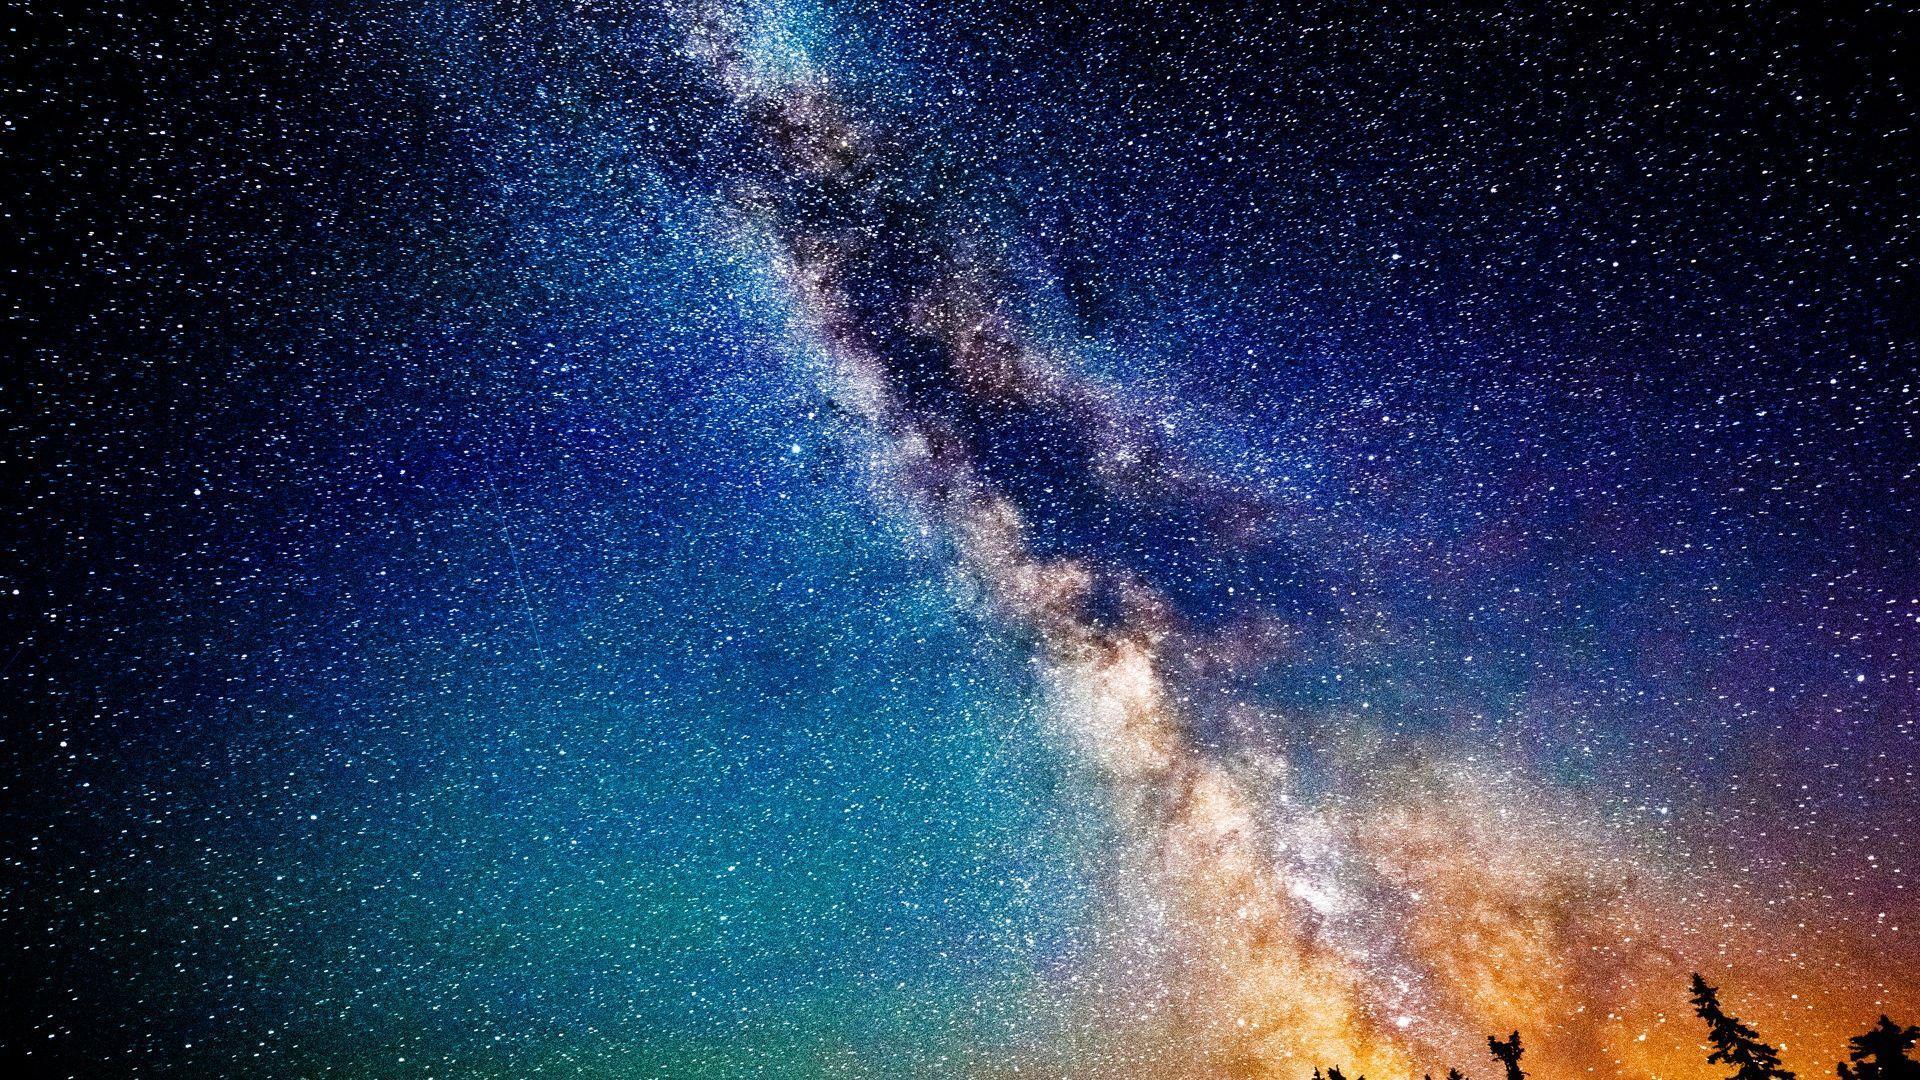 Outer Space Milky Way HD Wallpaper FullHDWpp HD